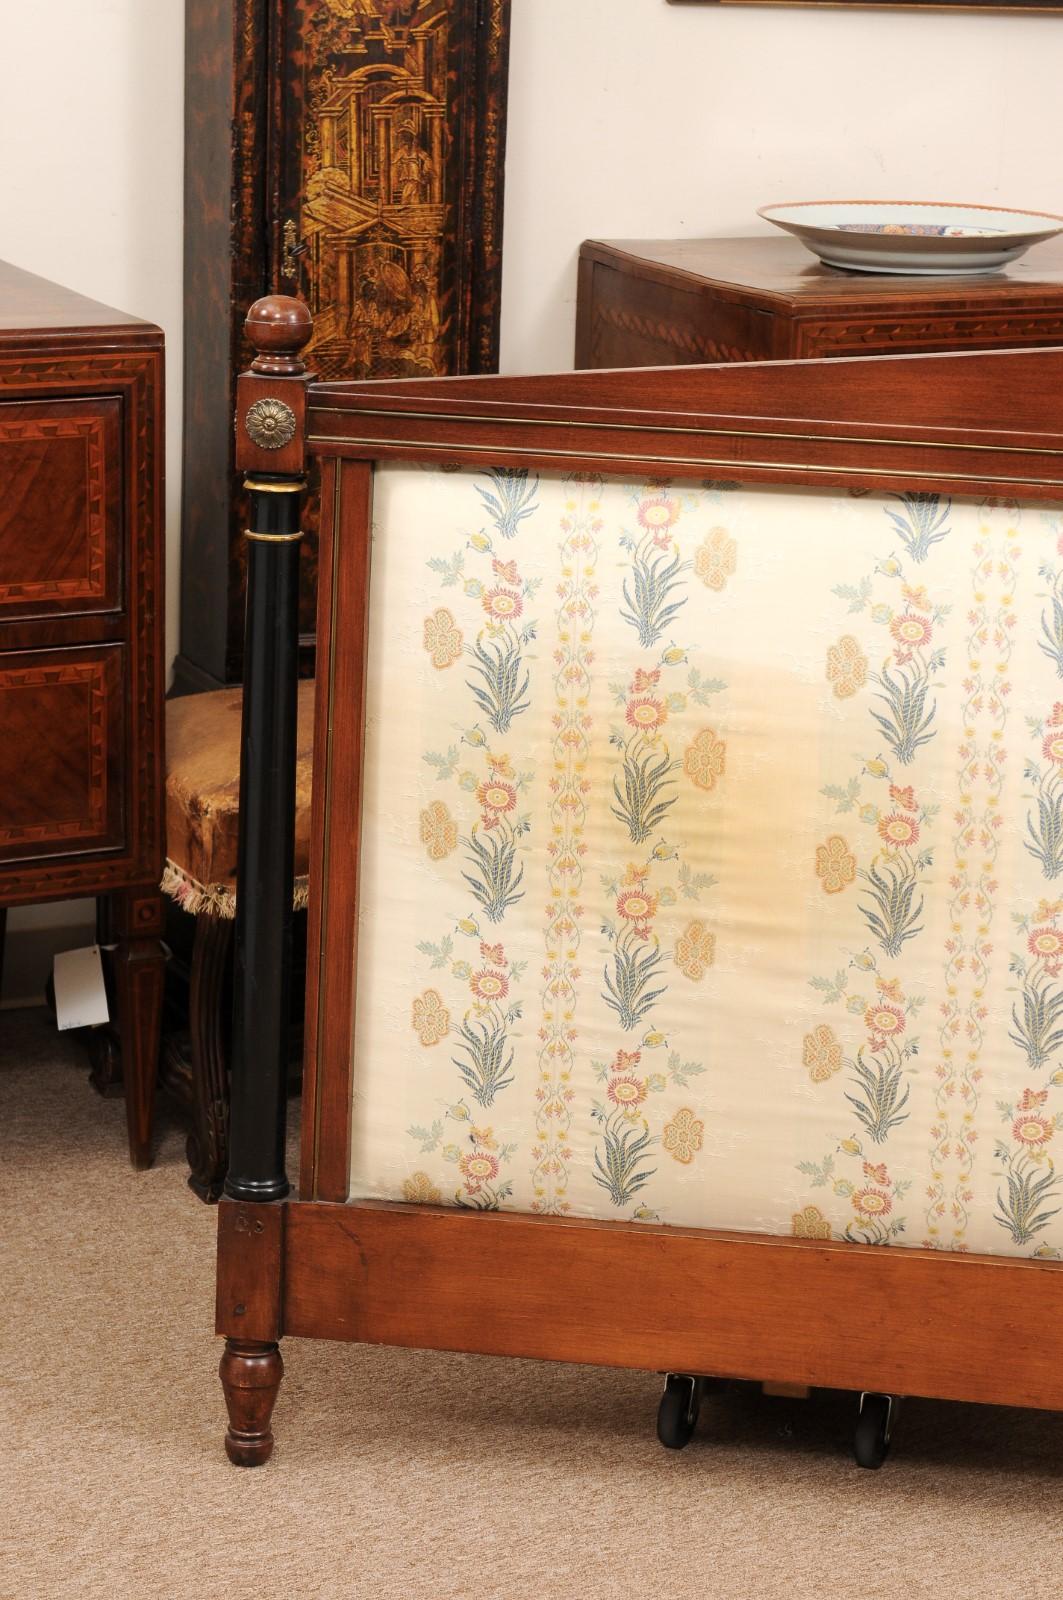 Late 19th Century French Empire Style Mahogany Headboard with Silk Embroidery For Sale